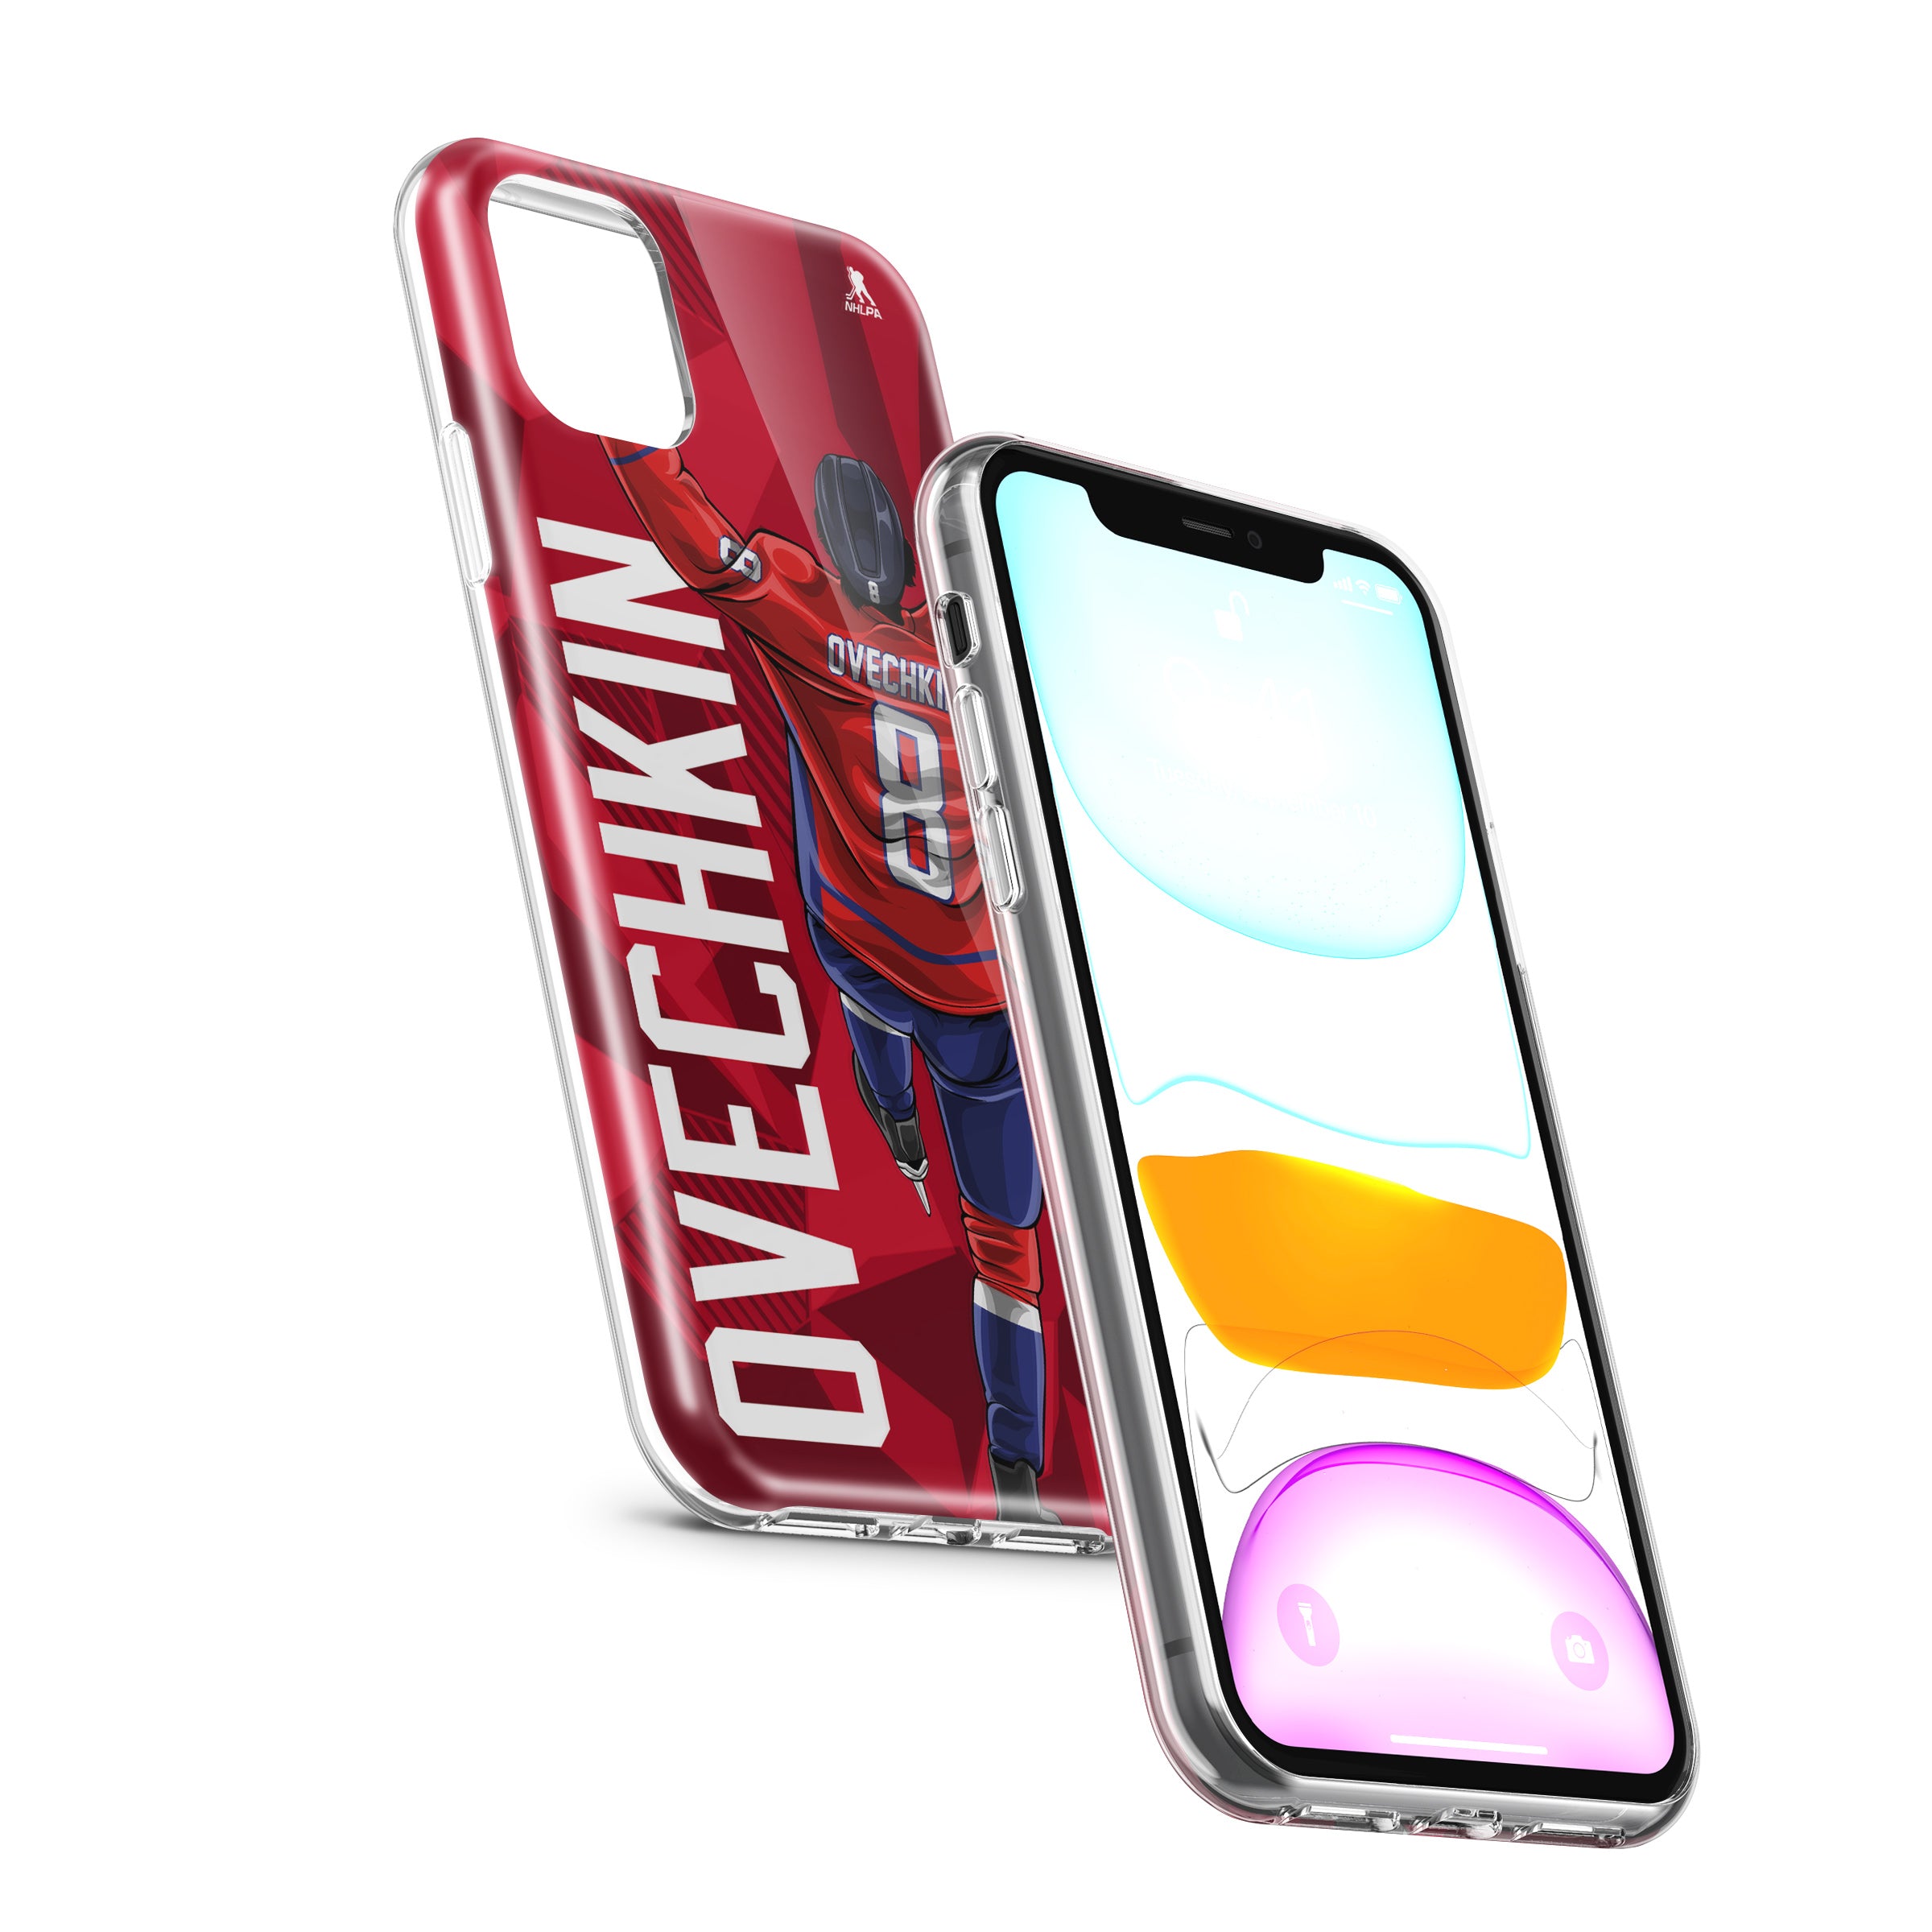 Ovechkin Star Series 2.0 Case